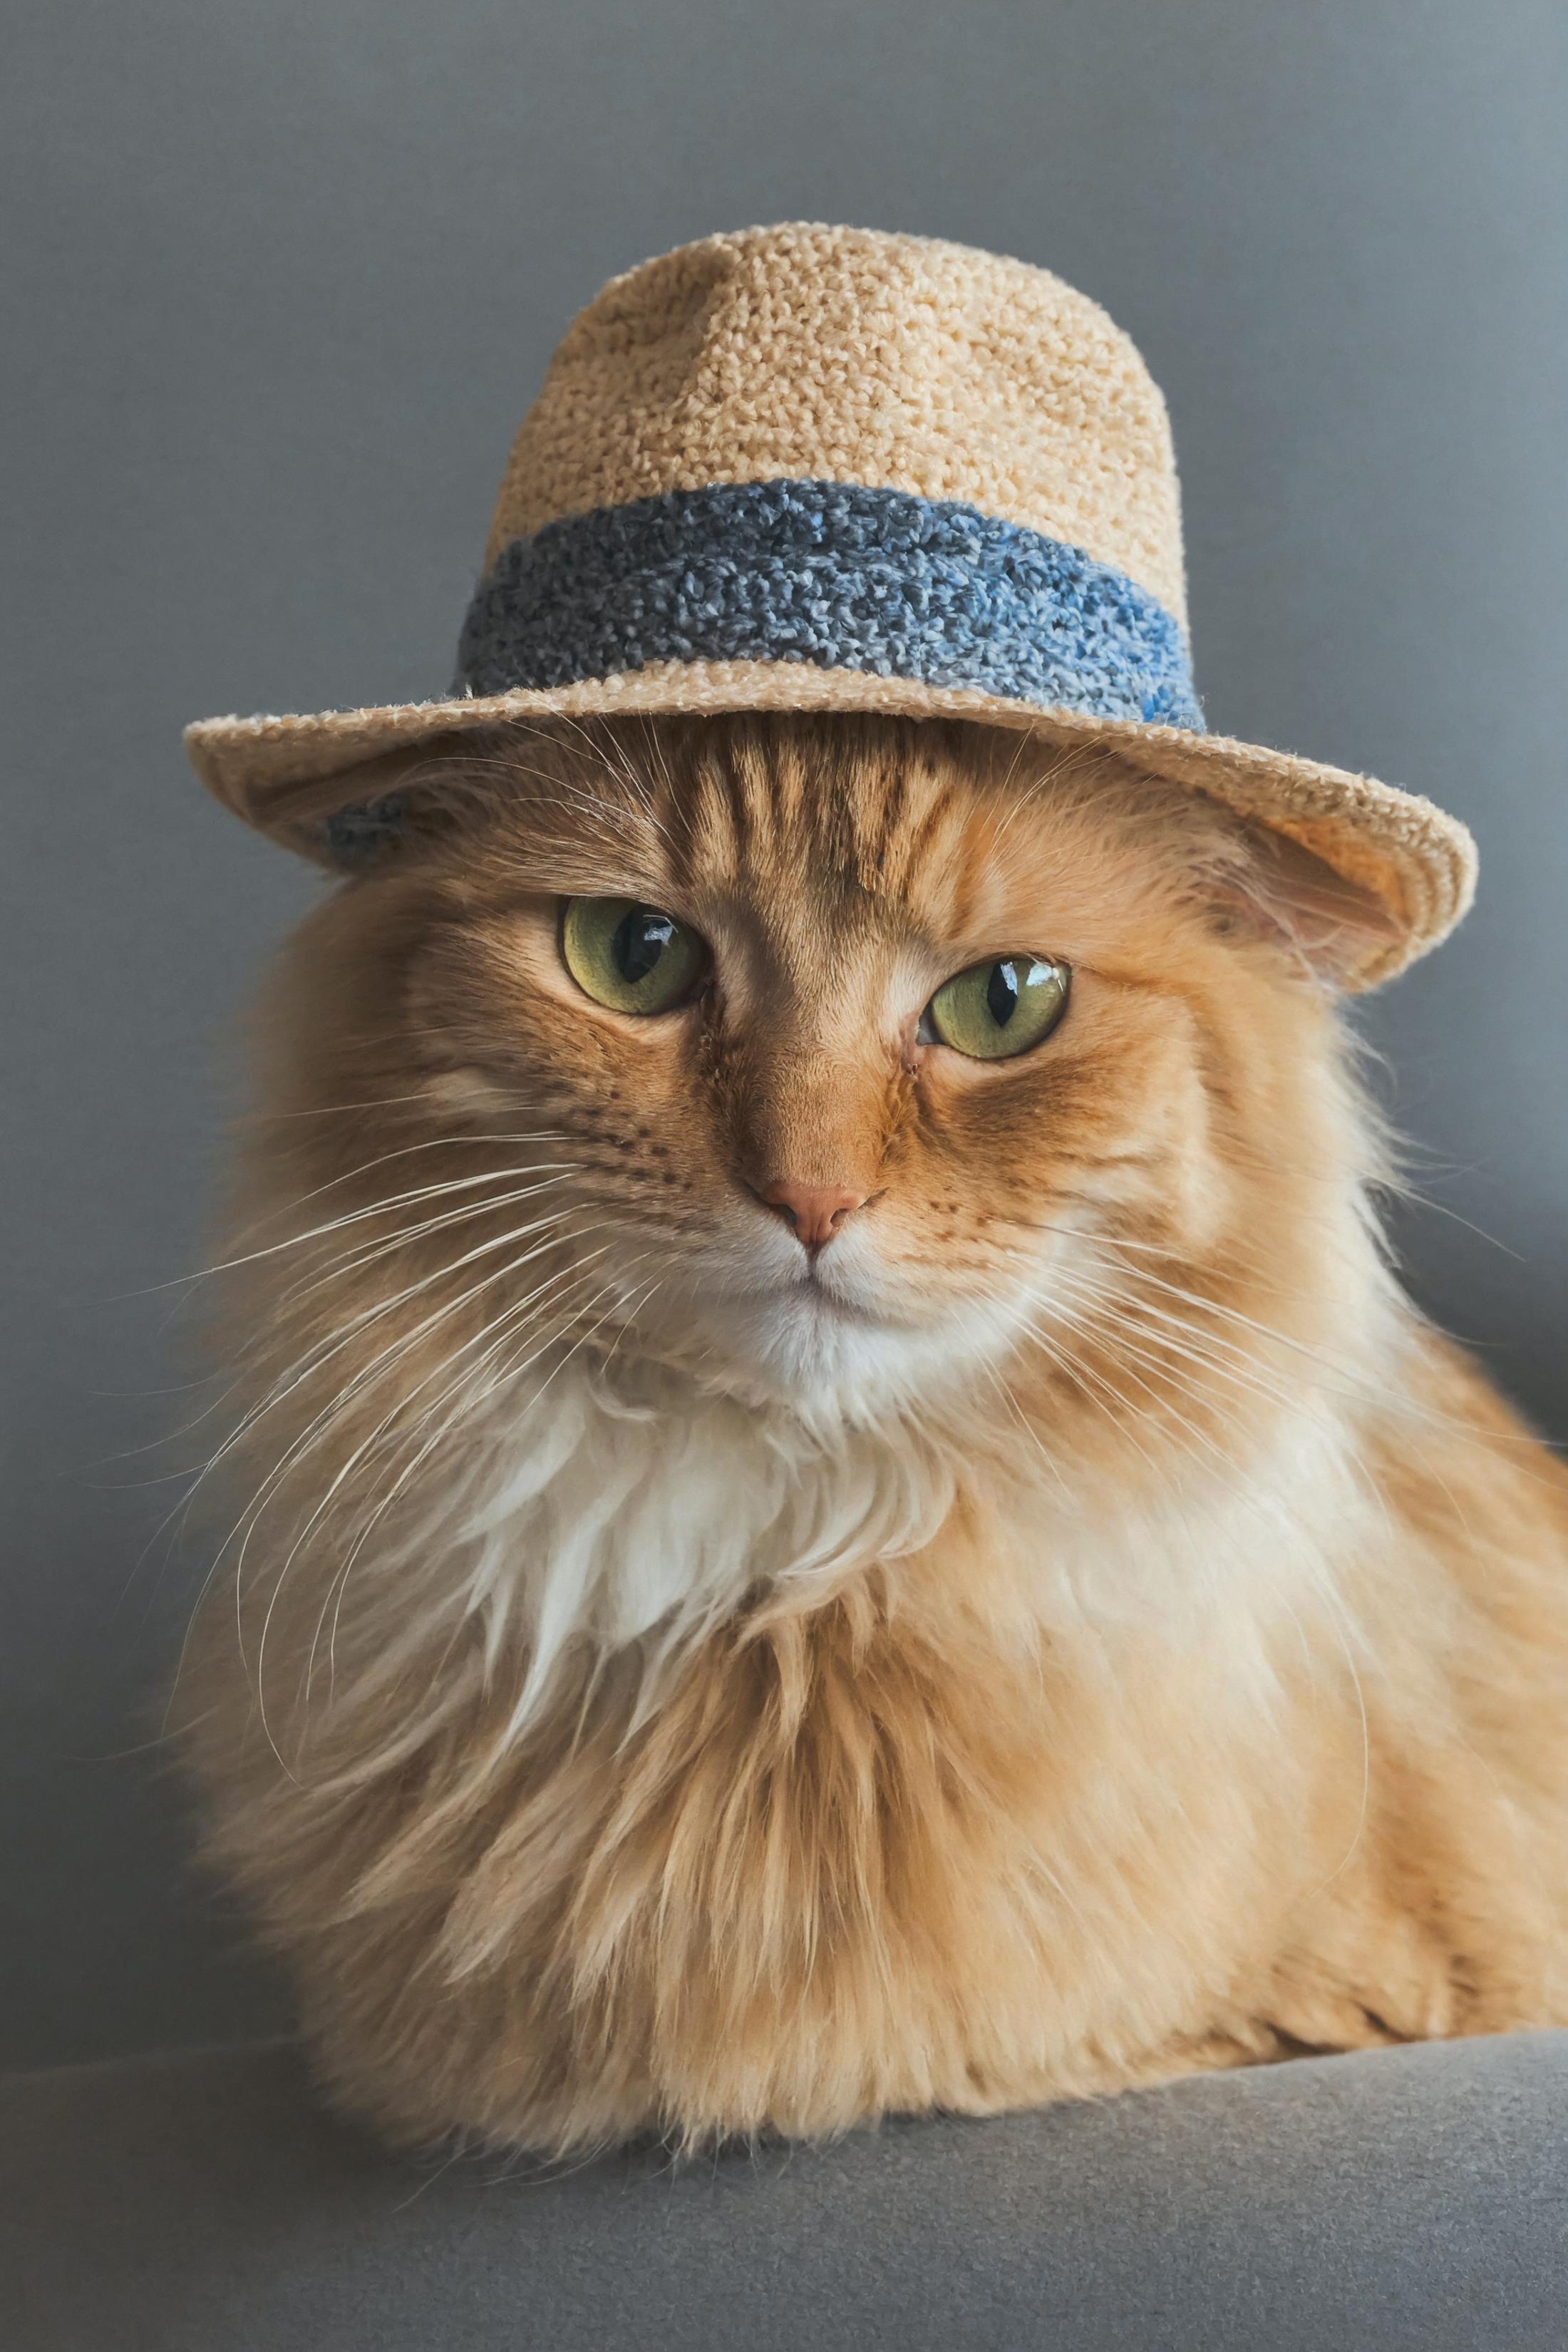 A fluffy orange and white cat wearing a blue and white hat.